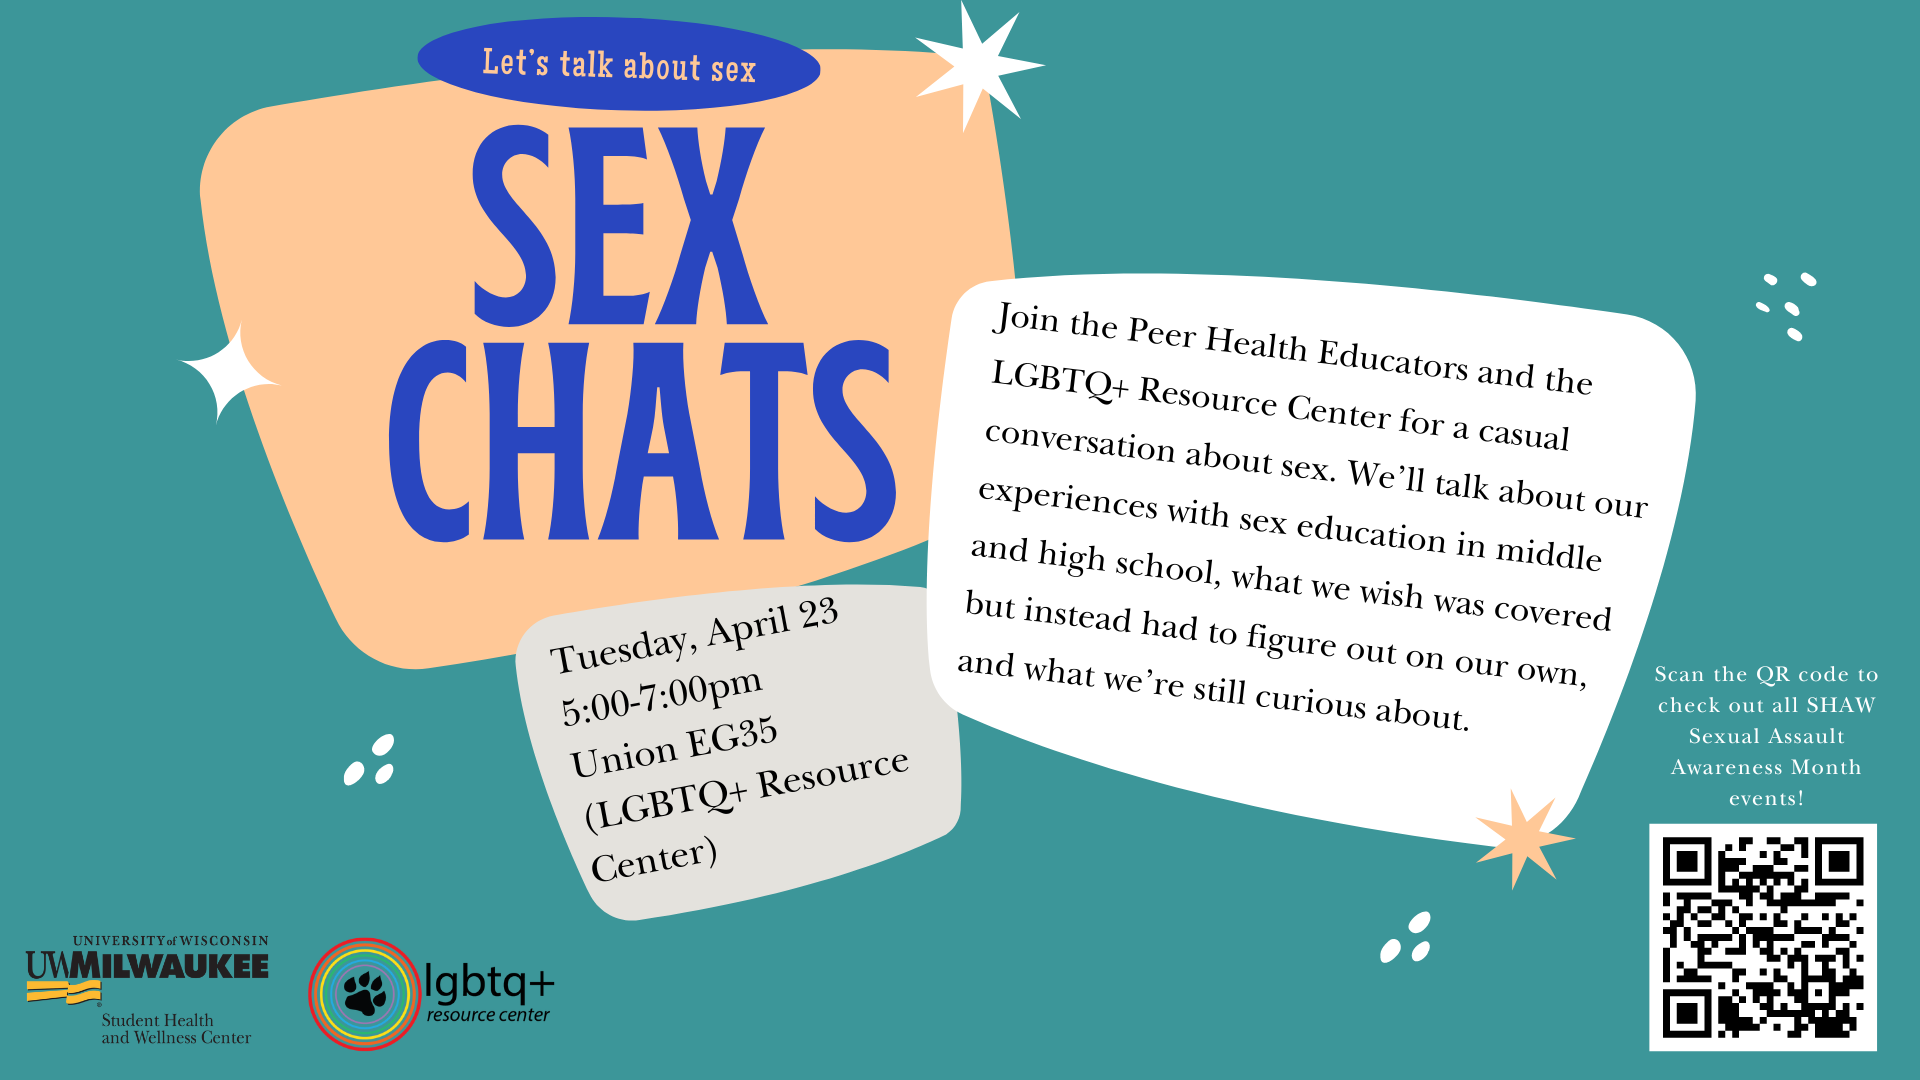 A graphic displaying information about an event focused on talking about sex